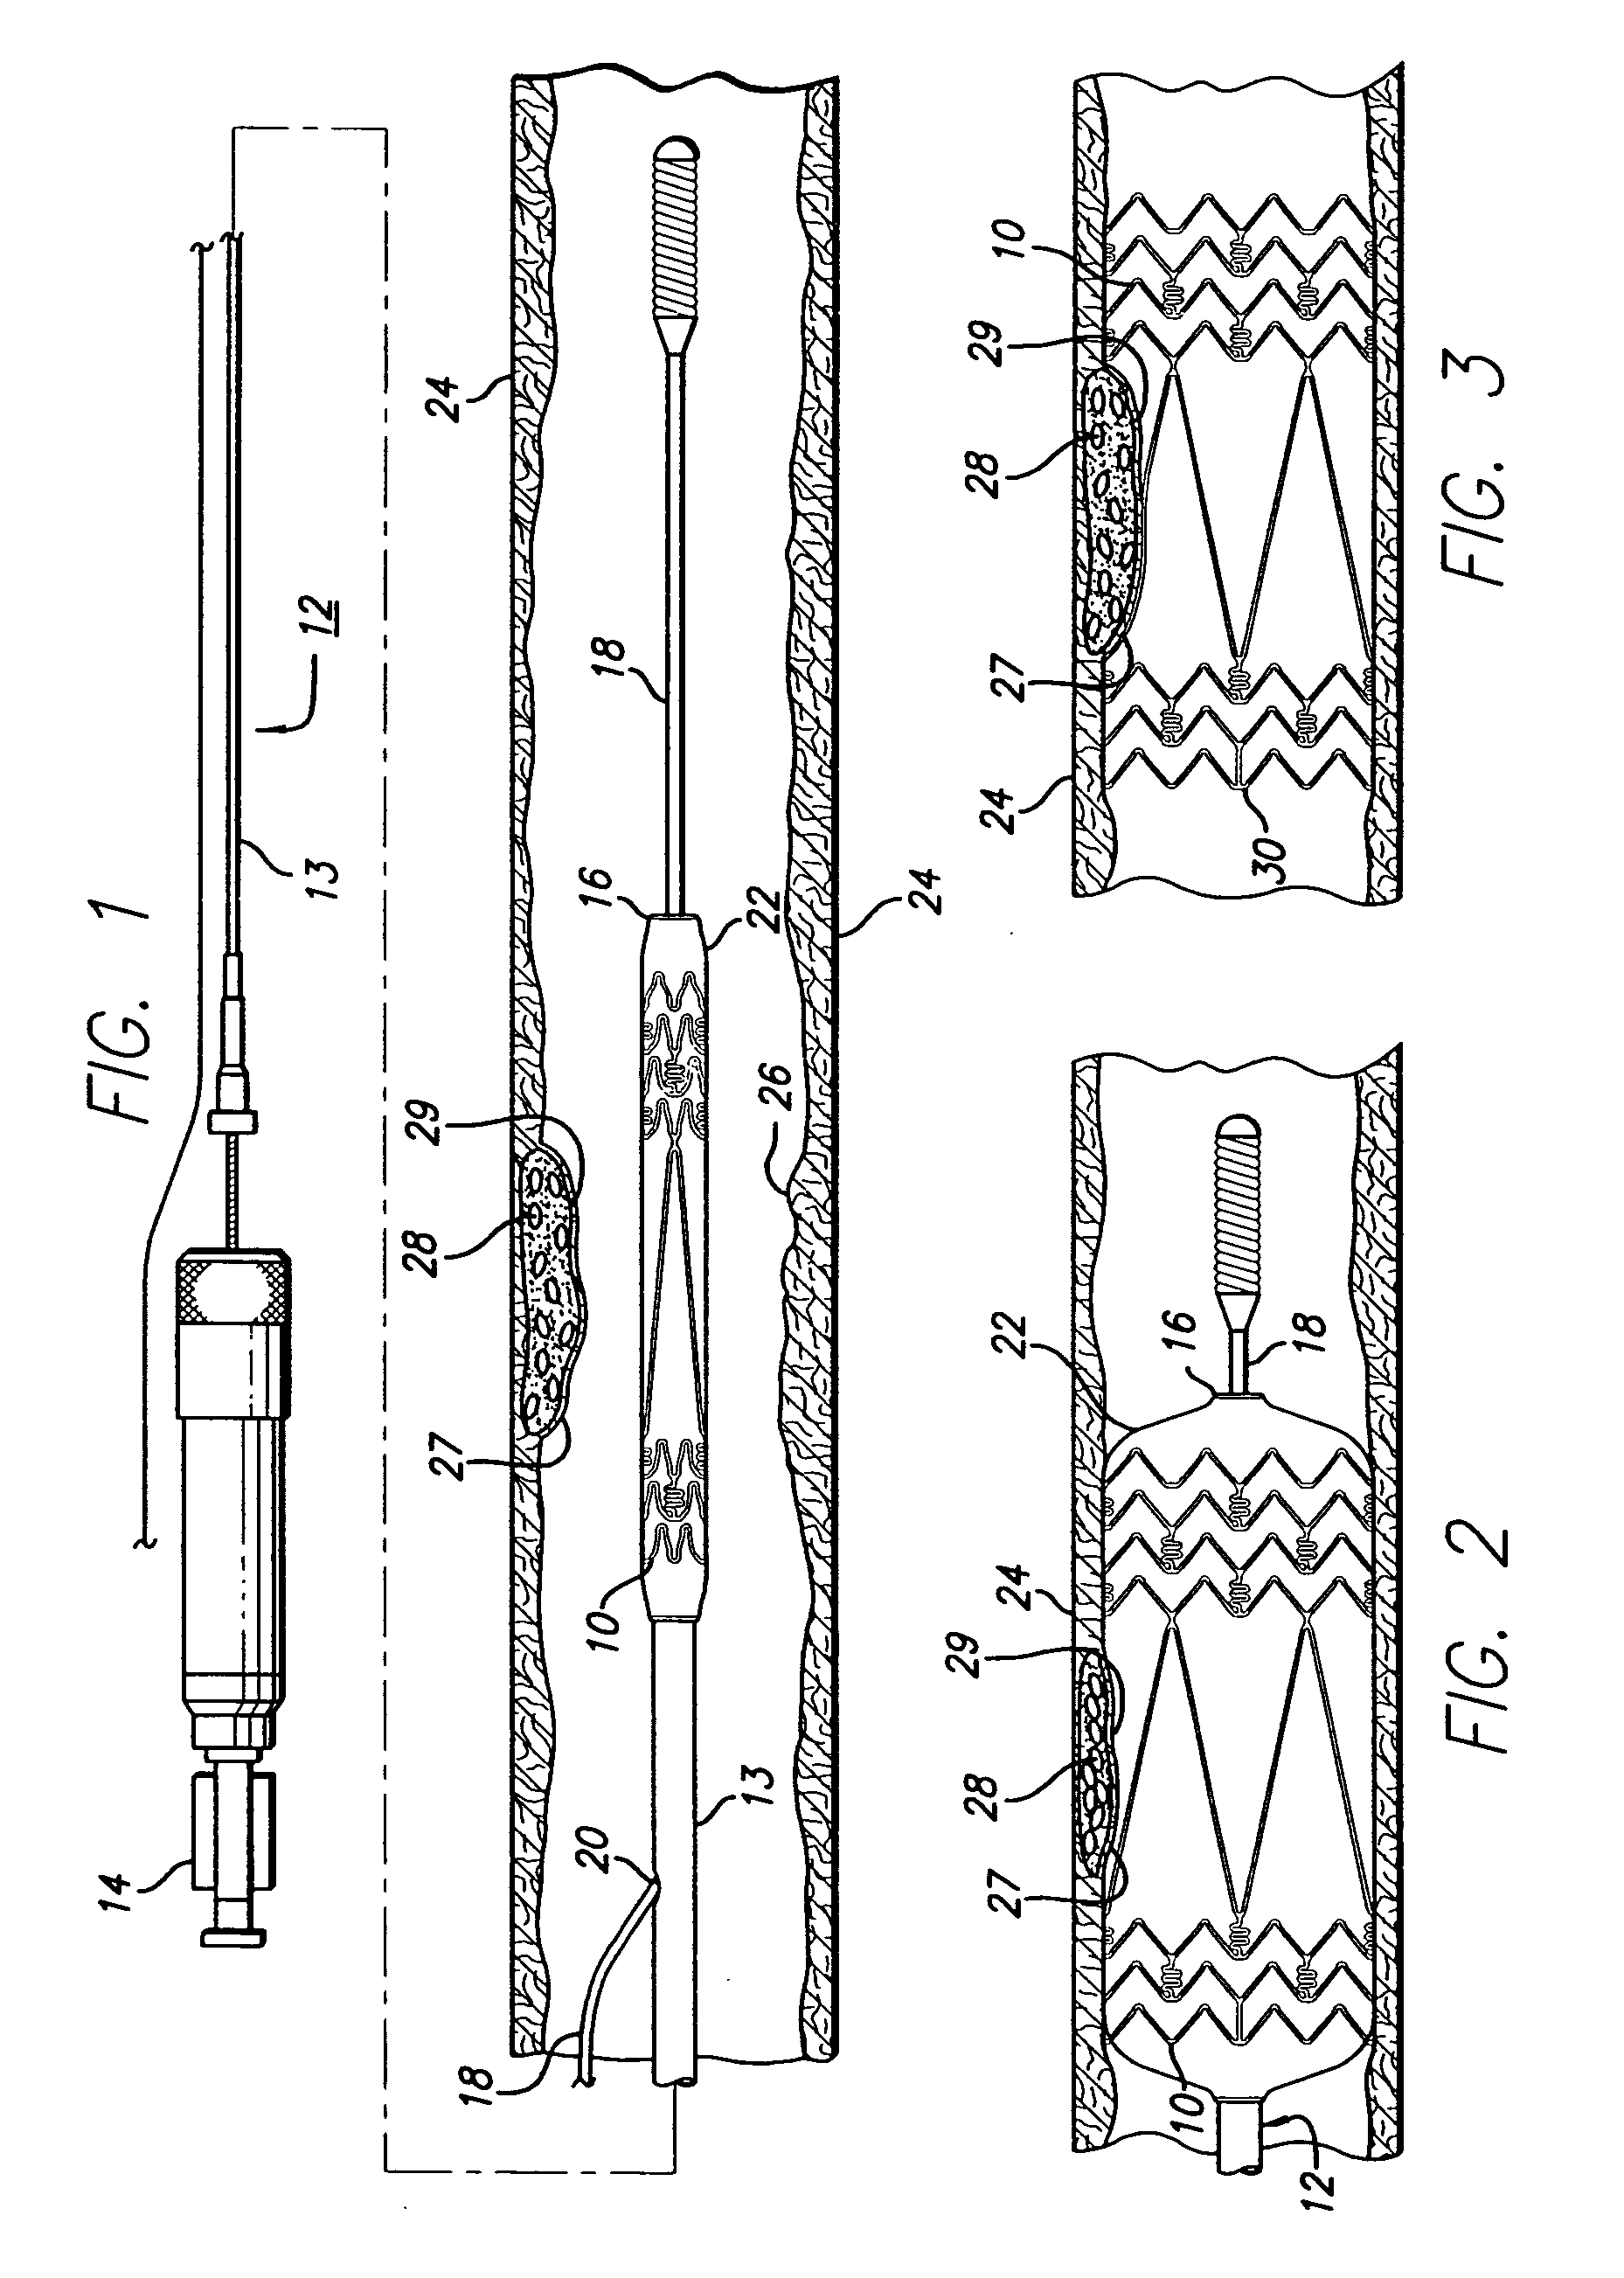 Intravascular stent and method of use